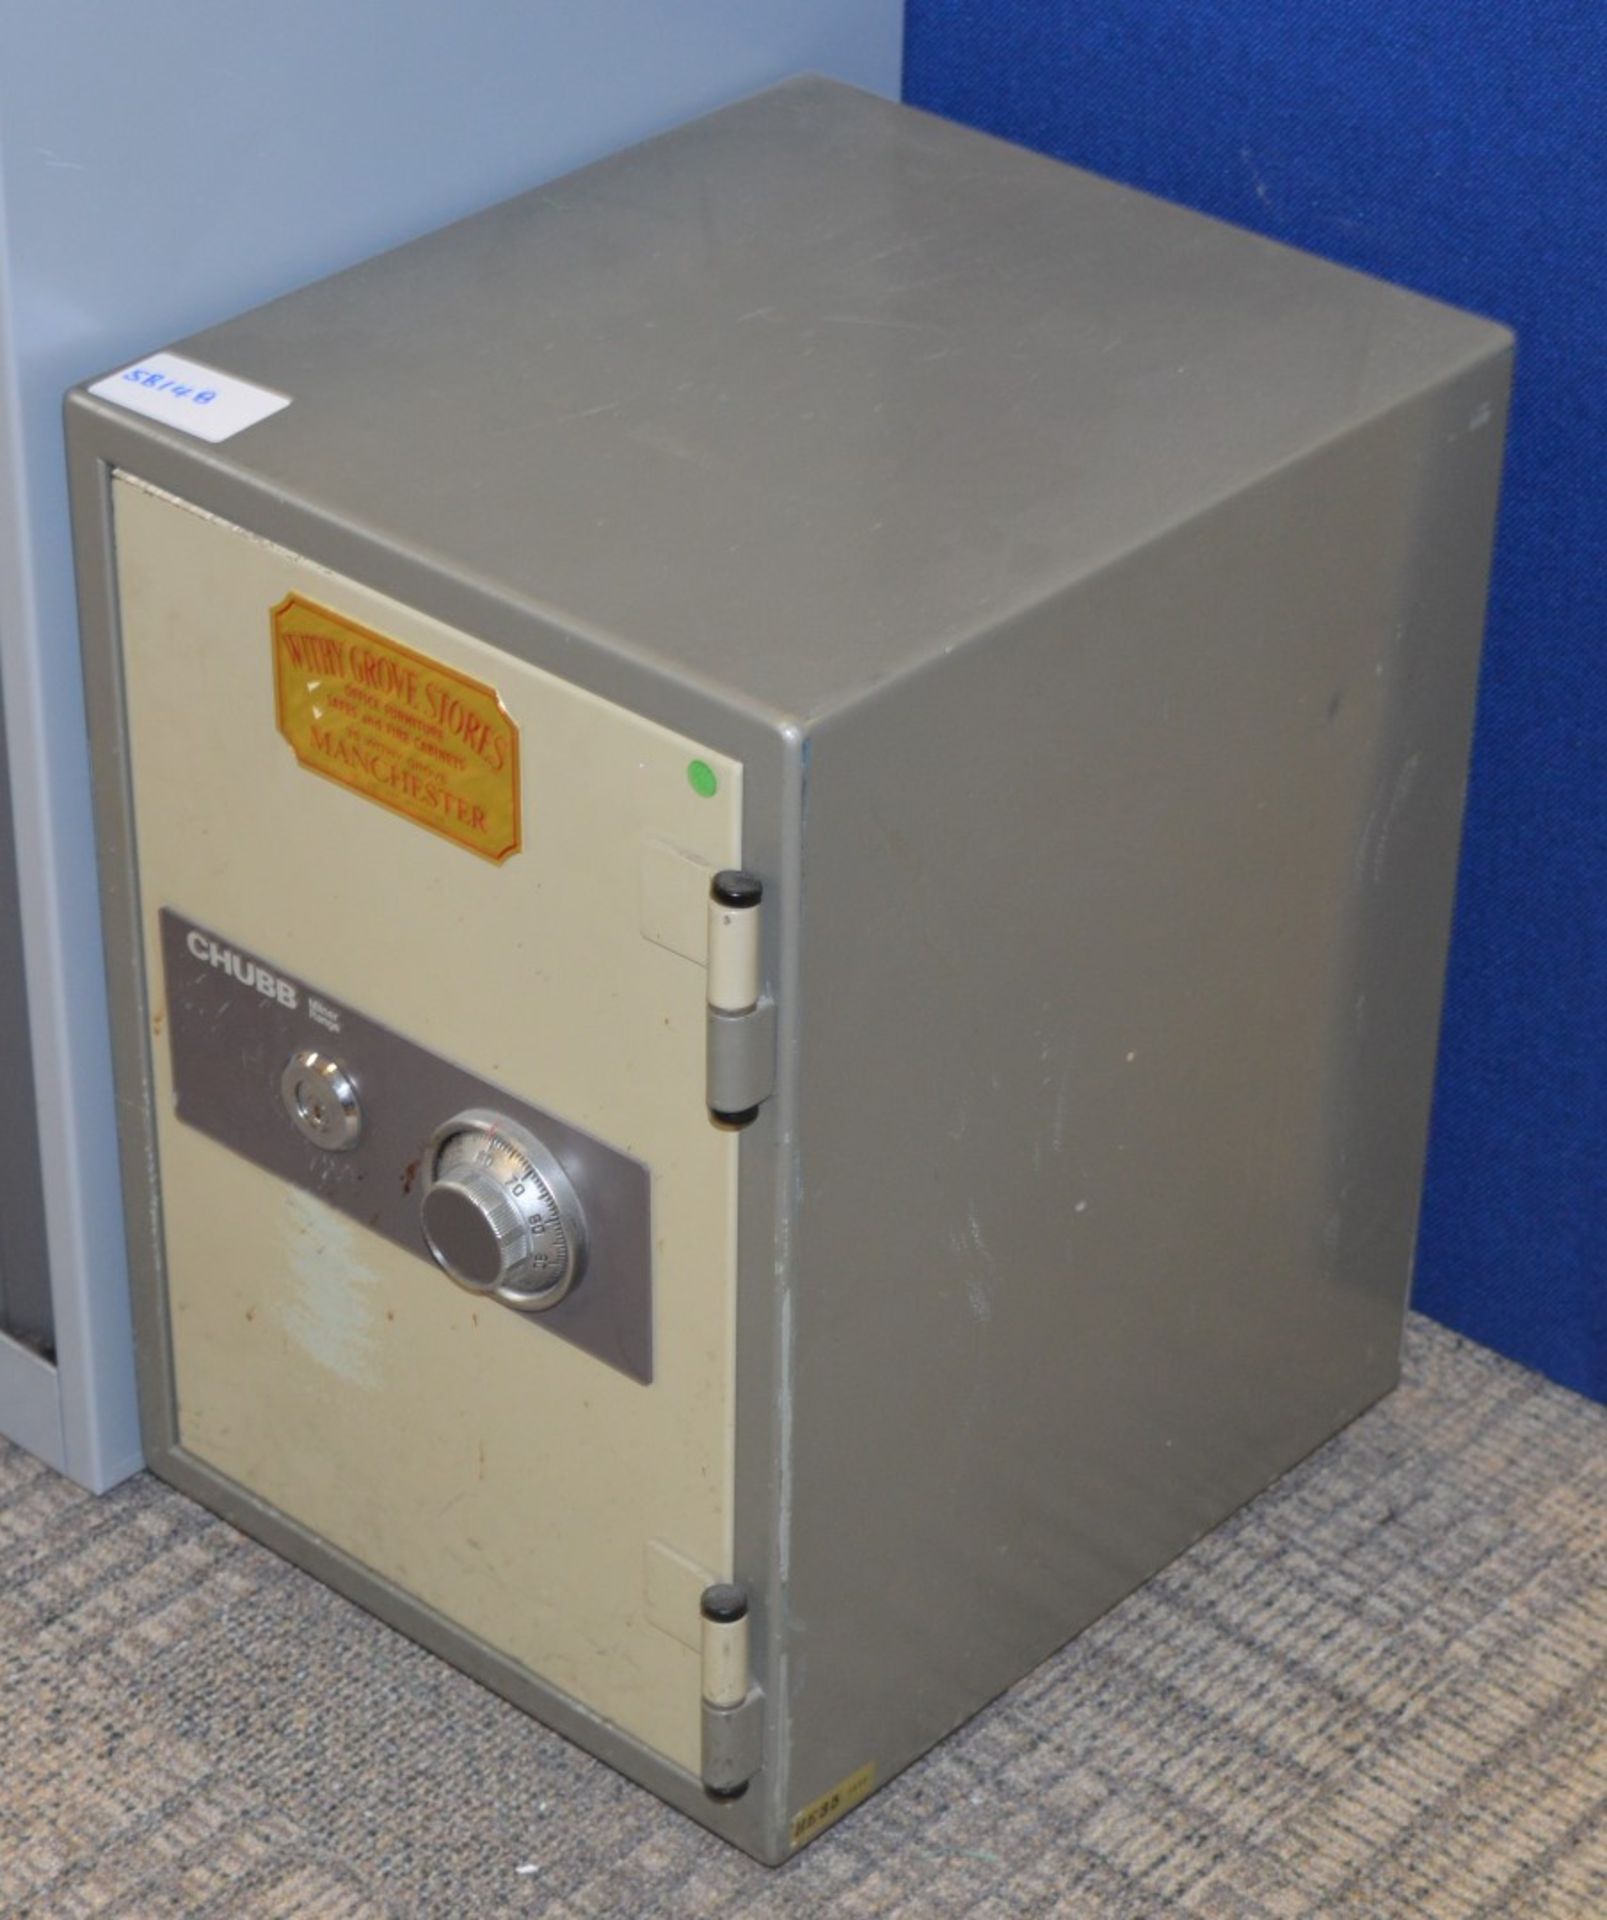 1 x Chubb Milner Range Fire Safe - Protect Important Documents, Valuables and Cash From Smoke and - Image 3 of 3